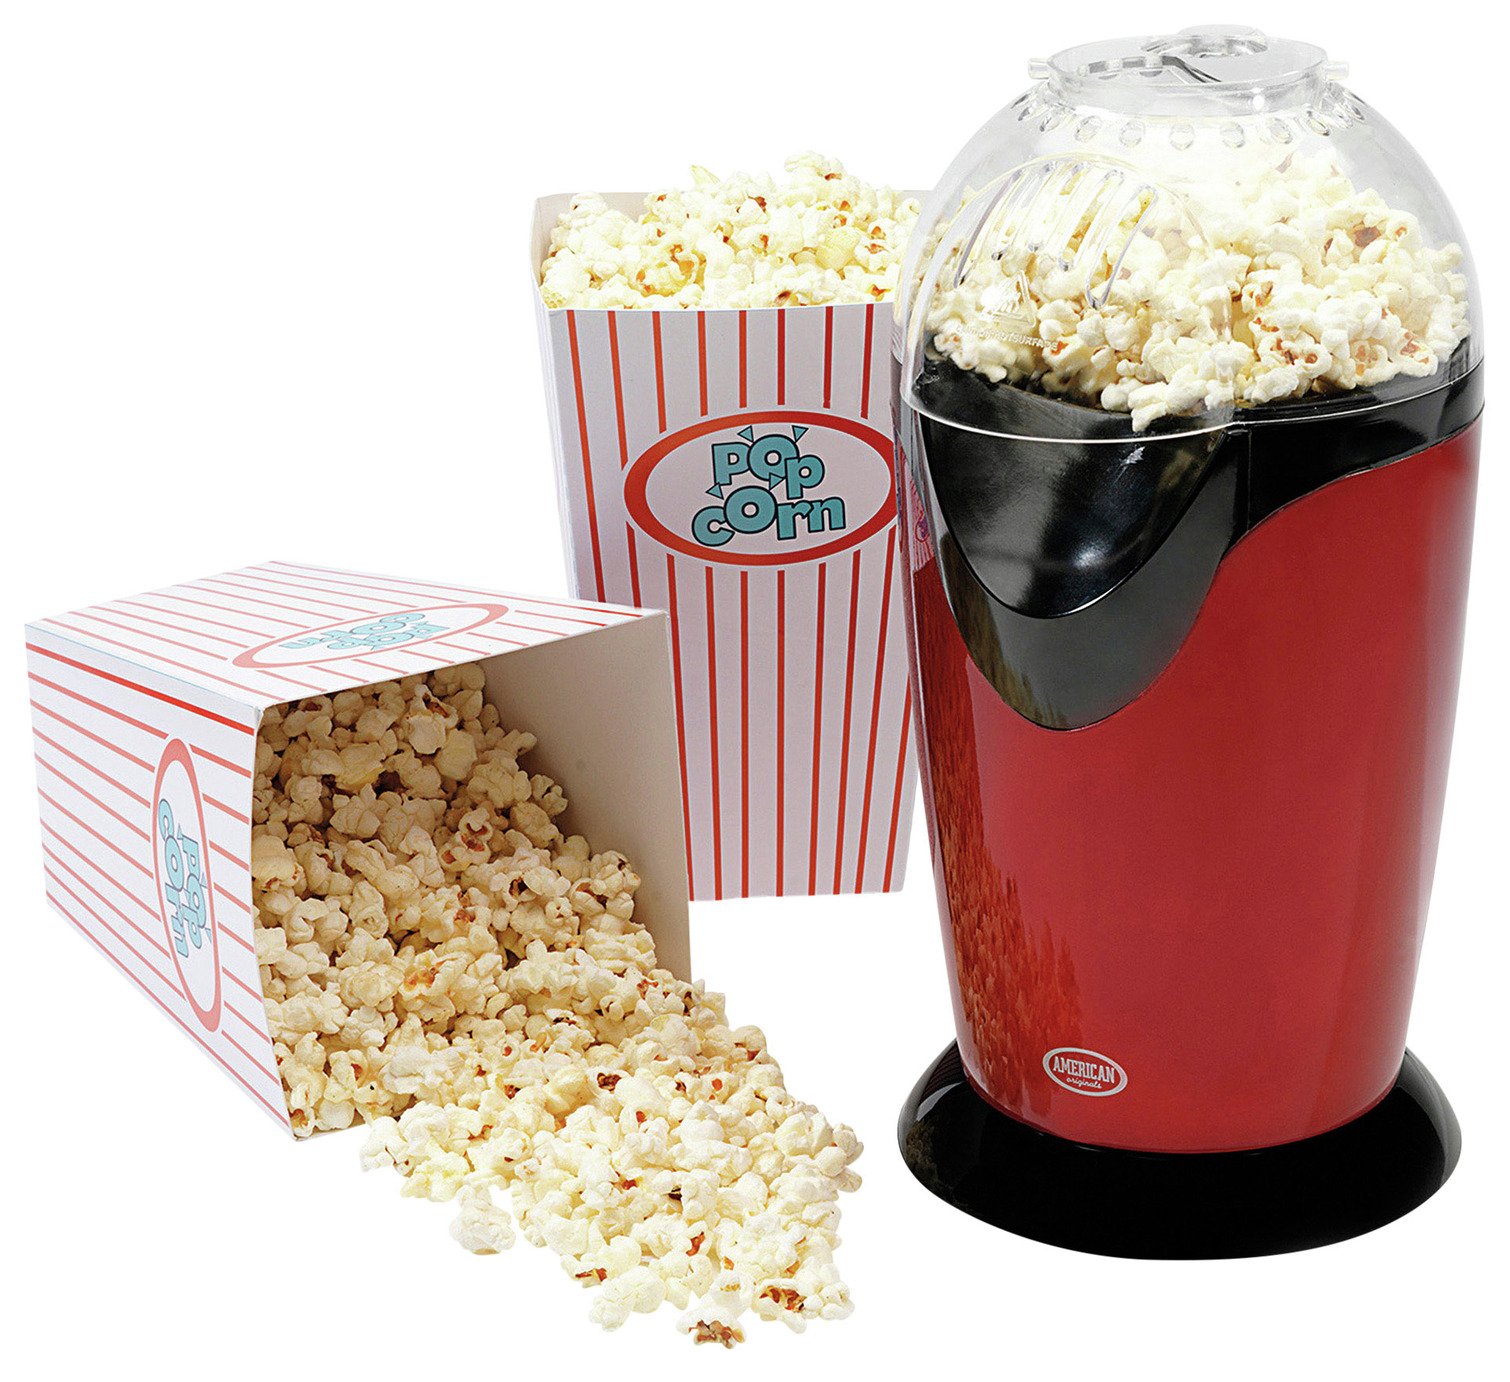 where can i buy a popcorn maker